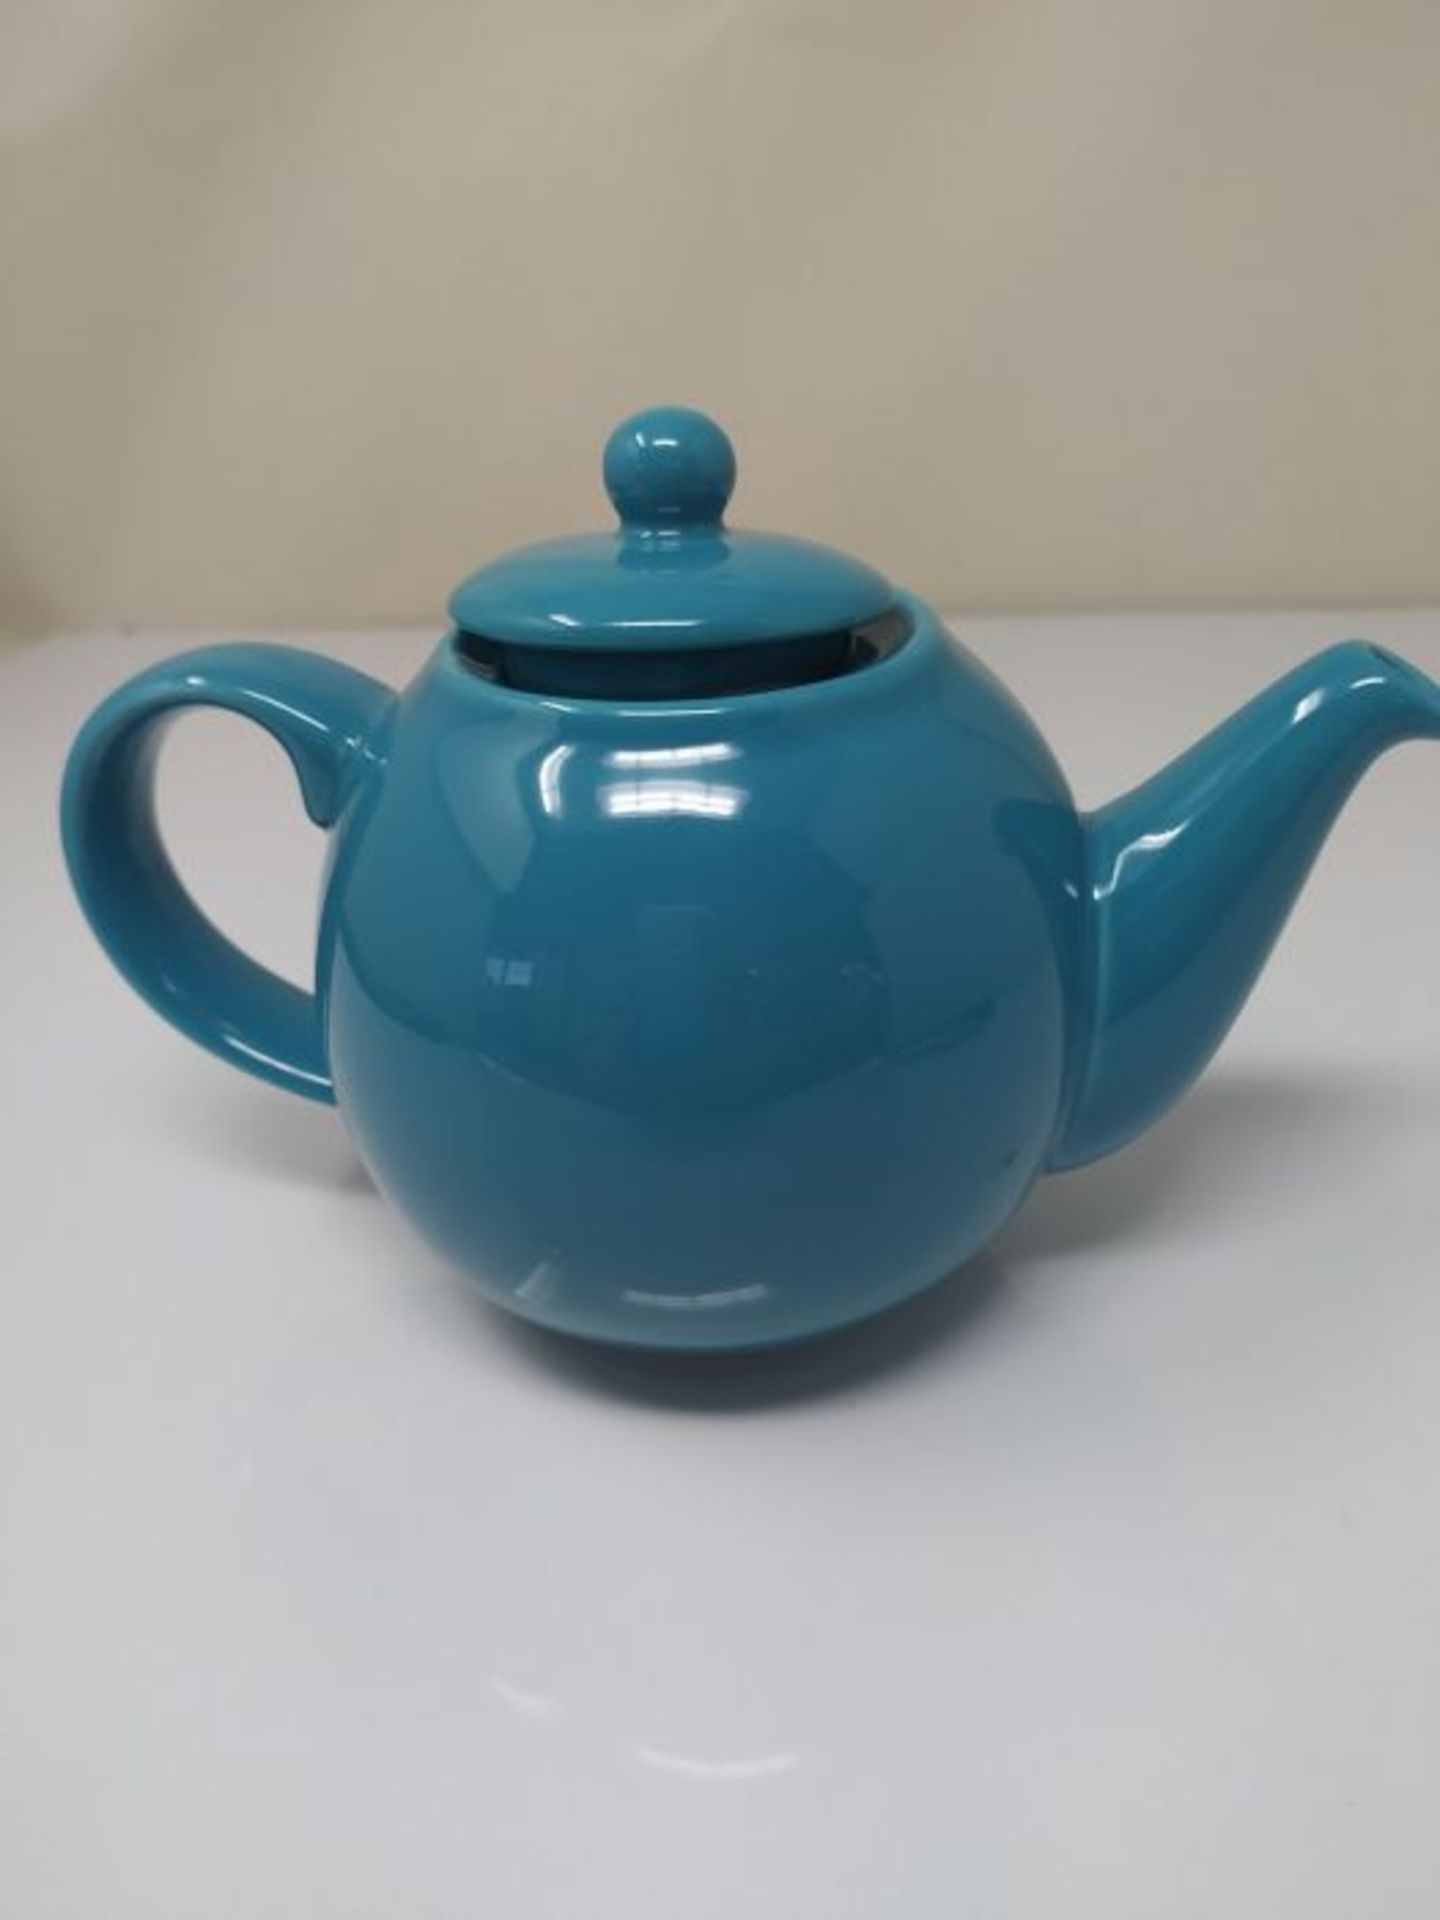 London Pottery Globe Small Teapot with Strainer, Ceramic, Aqua, 2 Cup Capacity (500 ml - Image 2 of 2